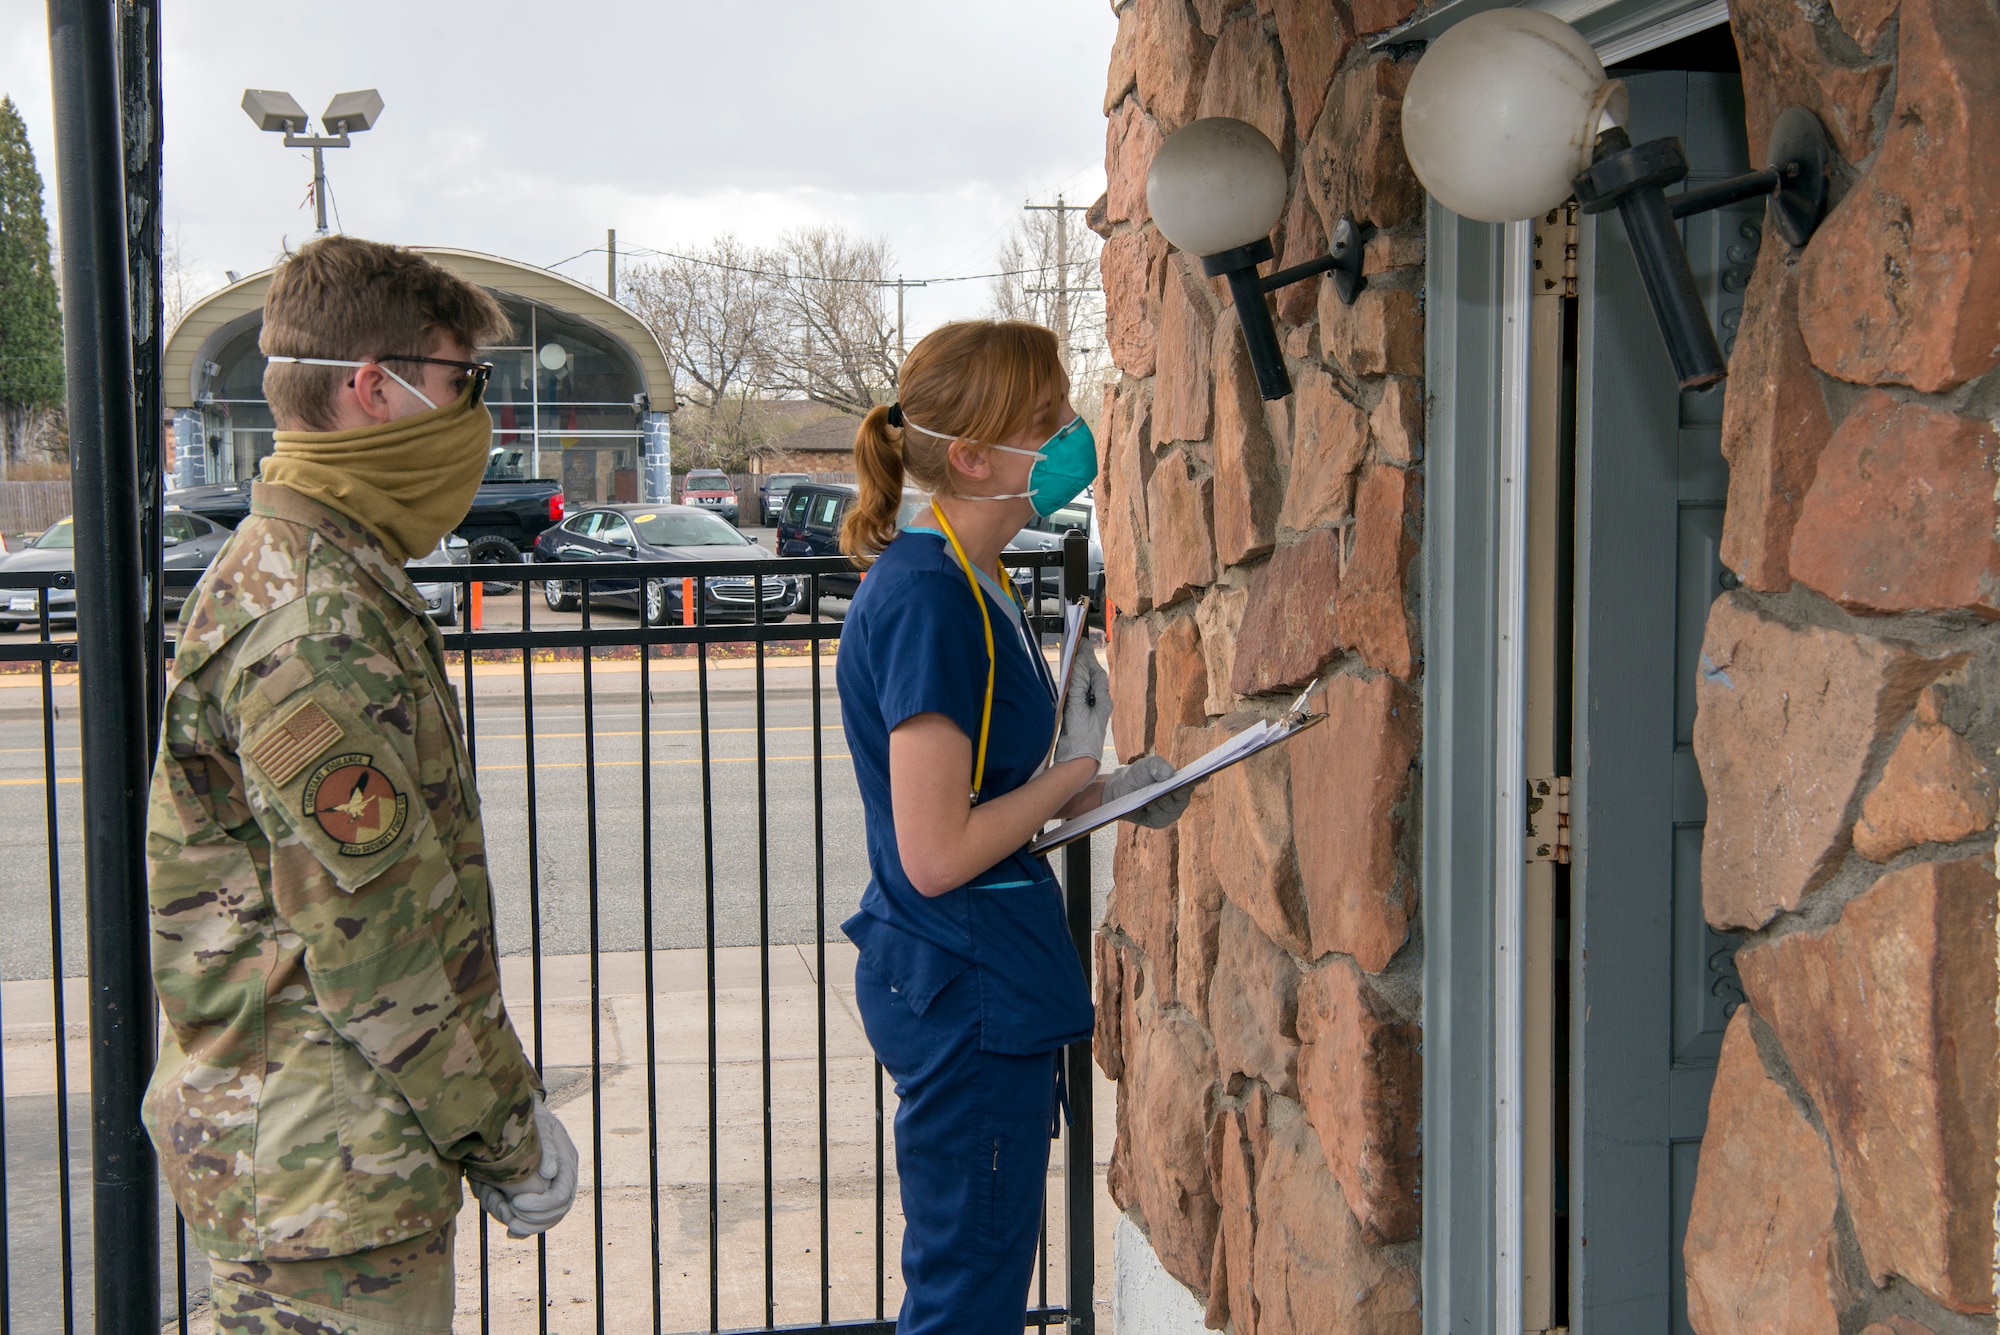 U.S. Air National Guard Airman 1st Class Ryan Terry, 233rd Space Warning Squadron security forces, assigned to Task Force Shelter Support for the Colorado National Guard’s COVID-19 response, along with volunteer nurse Rebekah Maciorowski, performs a wellness check to a resident at a motel where people without homes are lodged, Denver, Colo., April 10, 2020. Members of the Colorado National Guard volunteer to support state and local officials combat the Corona Virus Pandemic by assisting multiple agencies in the state of Colorado. (U.S. Air National Guard photo by Senior Master Sgt. John Rohrer)